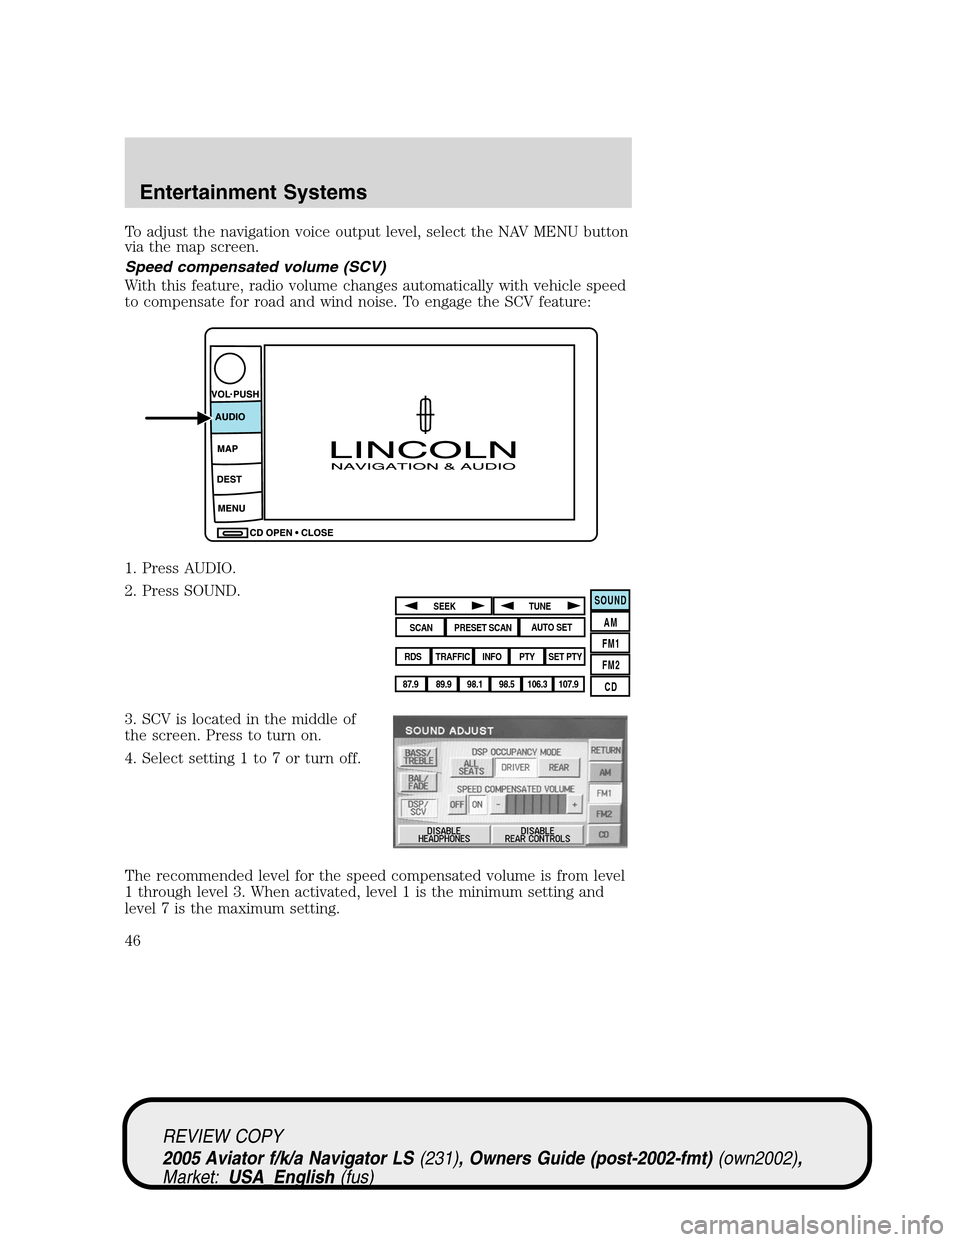 LINCOLN AVIATOR 2005 Service Manual To adjust the navigation voice output level, select the NAV MENU button
via the map screen.
Speed compensated volume (SCV)
With this feature, radio volume changes automatically with vehicle speed
to c